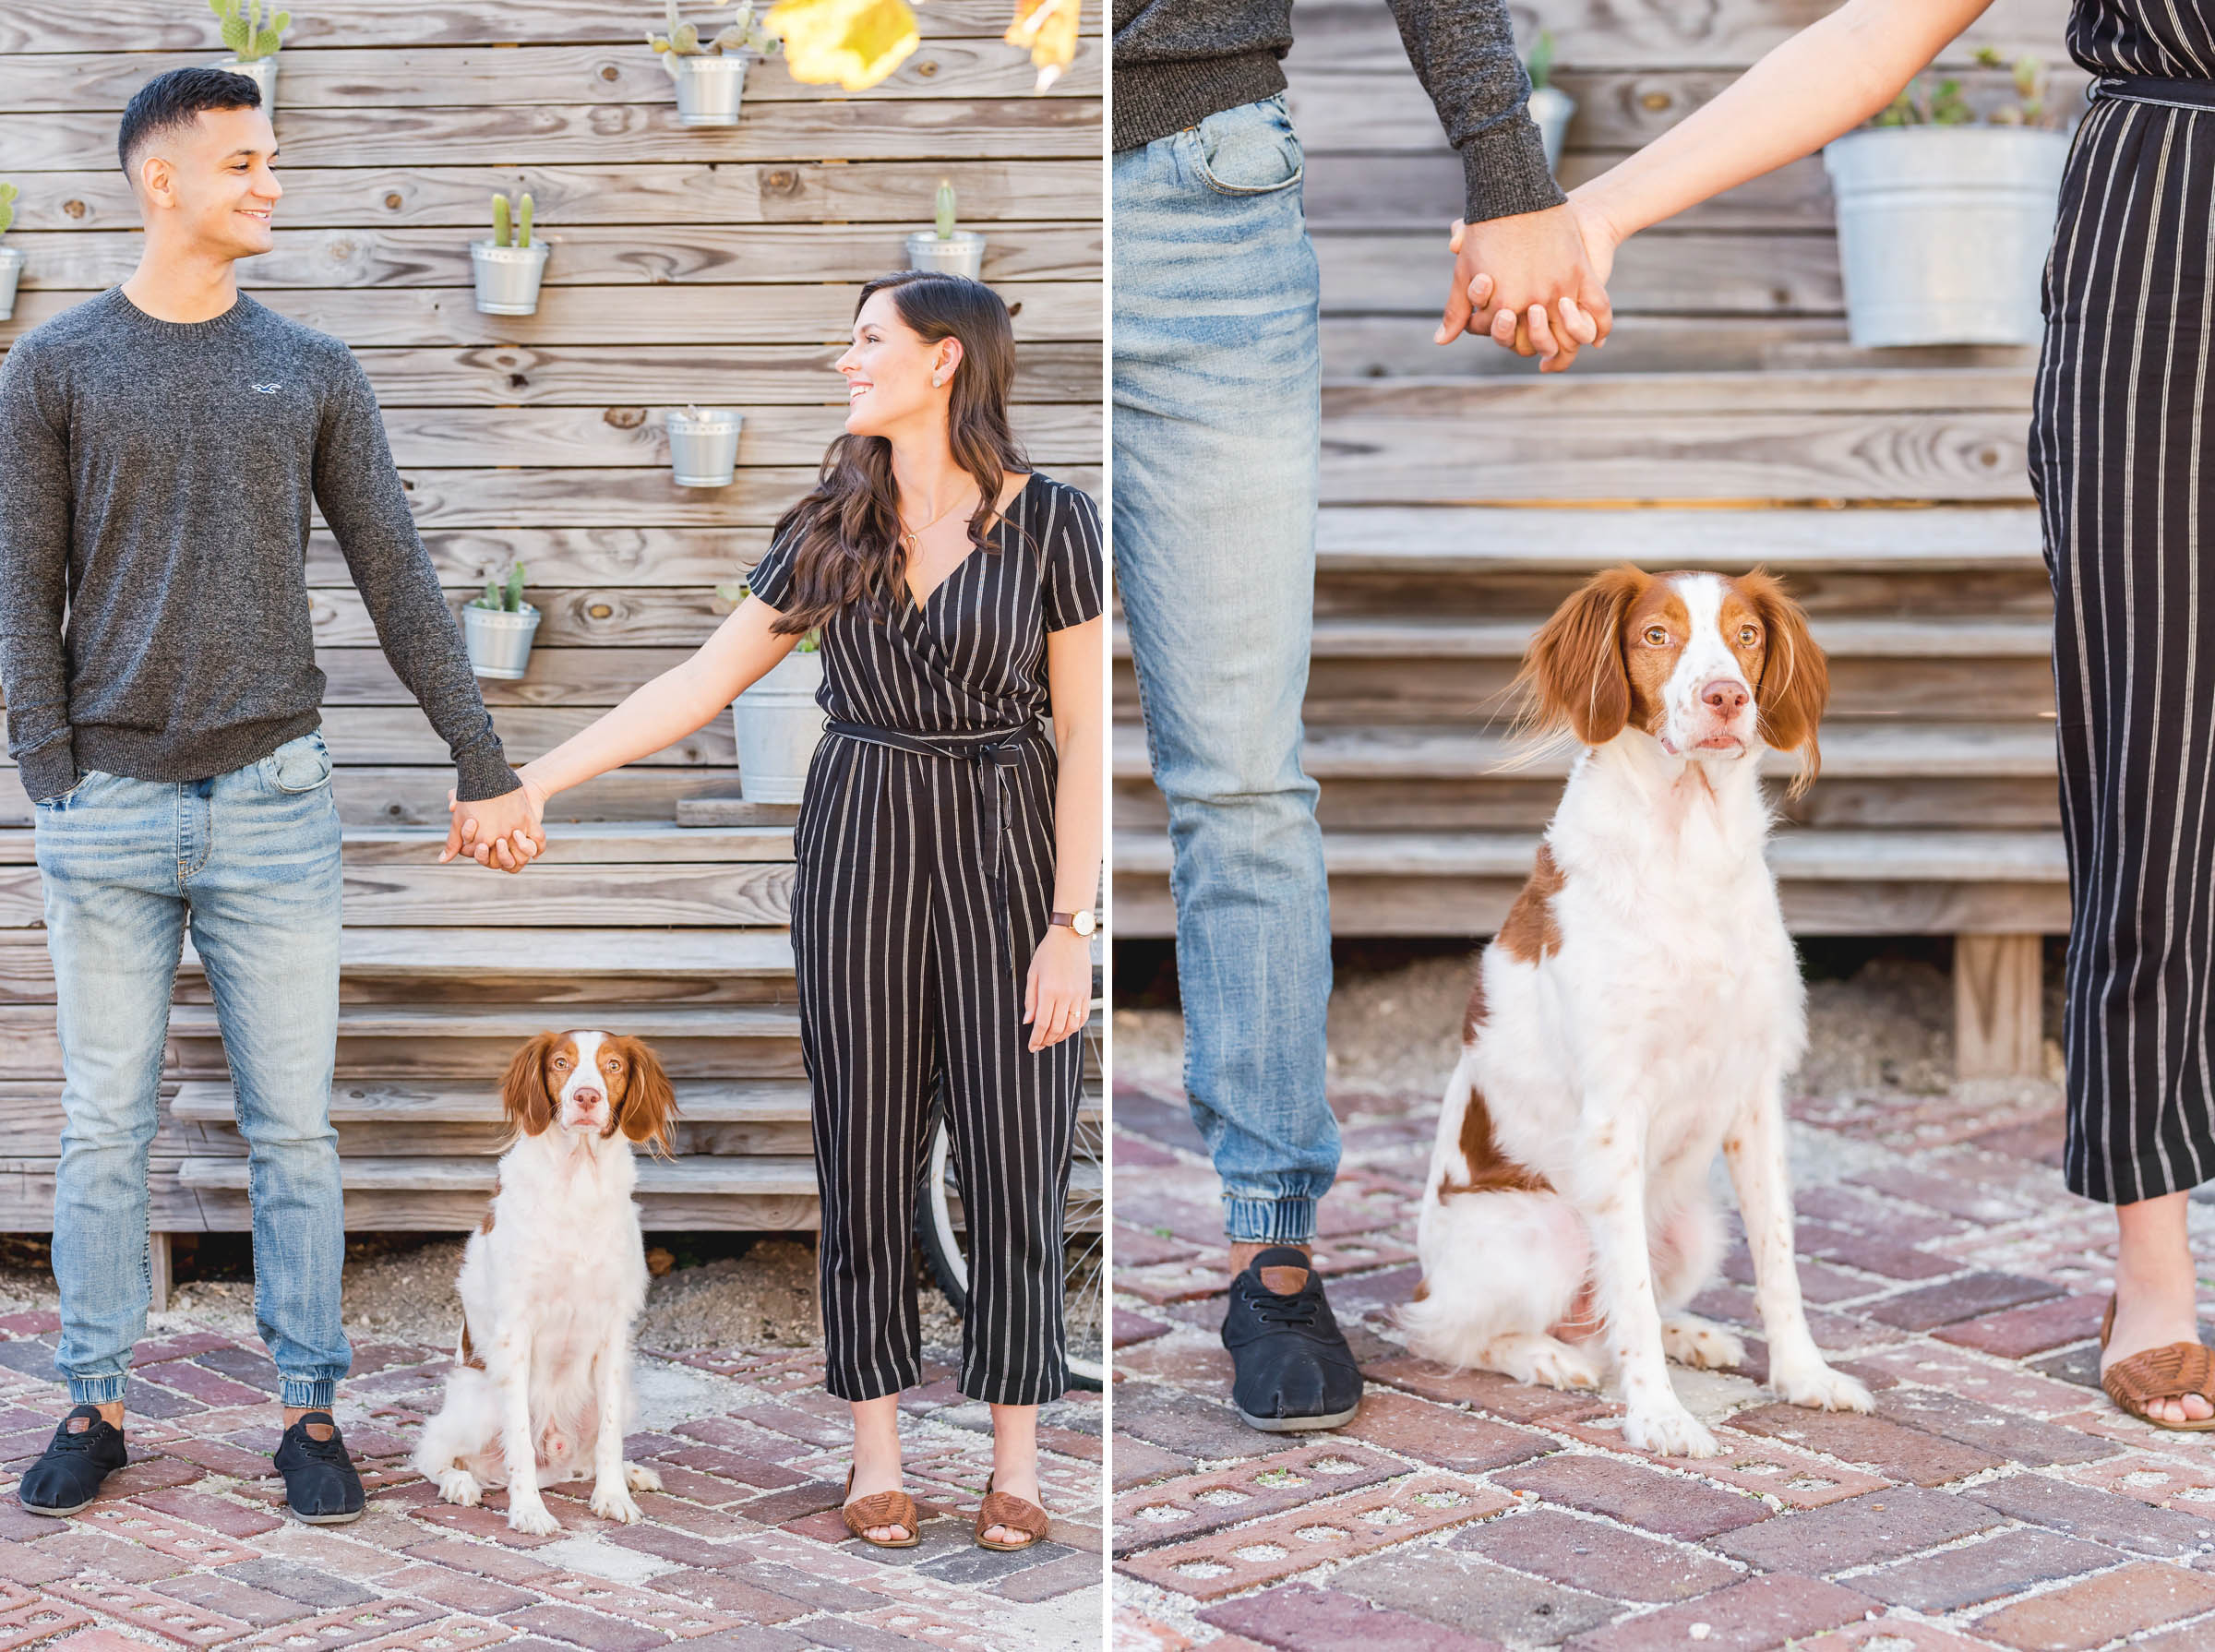 amanda and peter holding hands with dog on patio